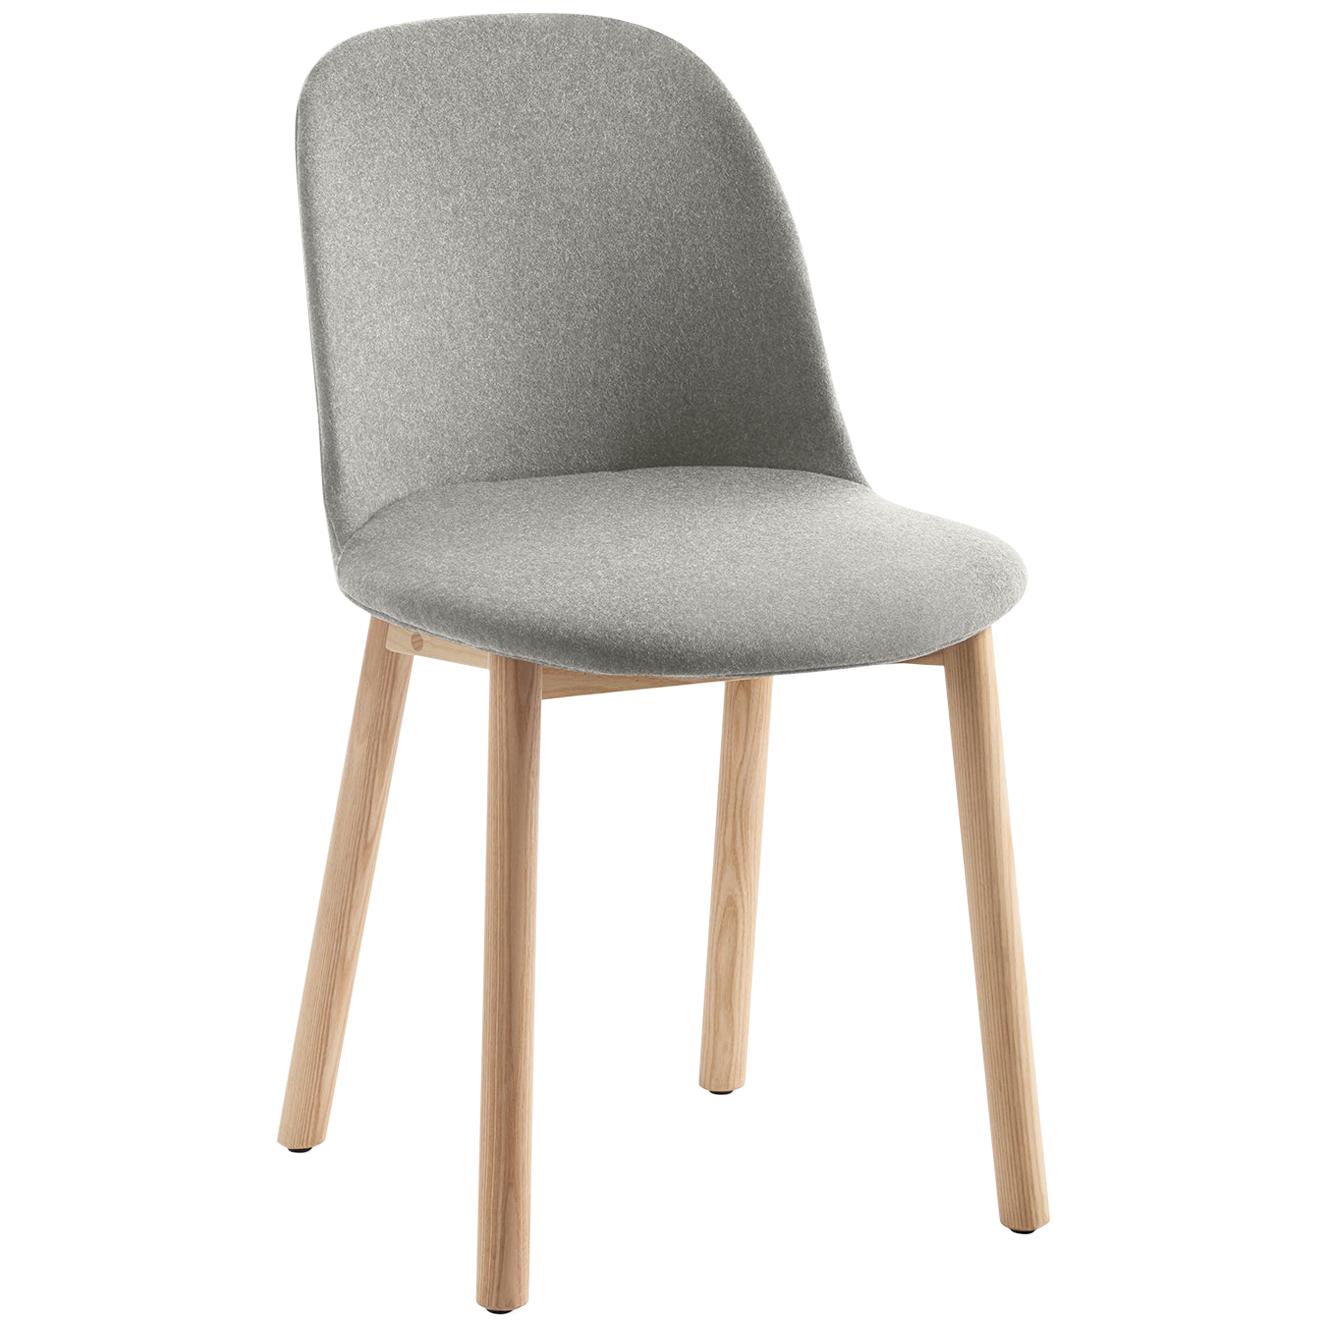 Emeco Alfi High Back Chair in Grey Wool with Natural Frame by Jasper Morrison